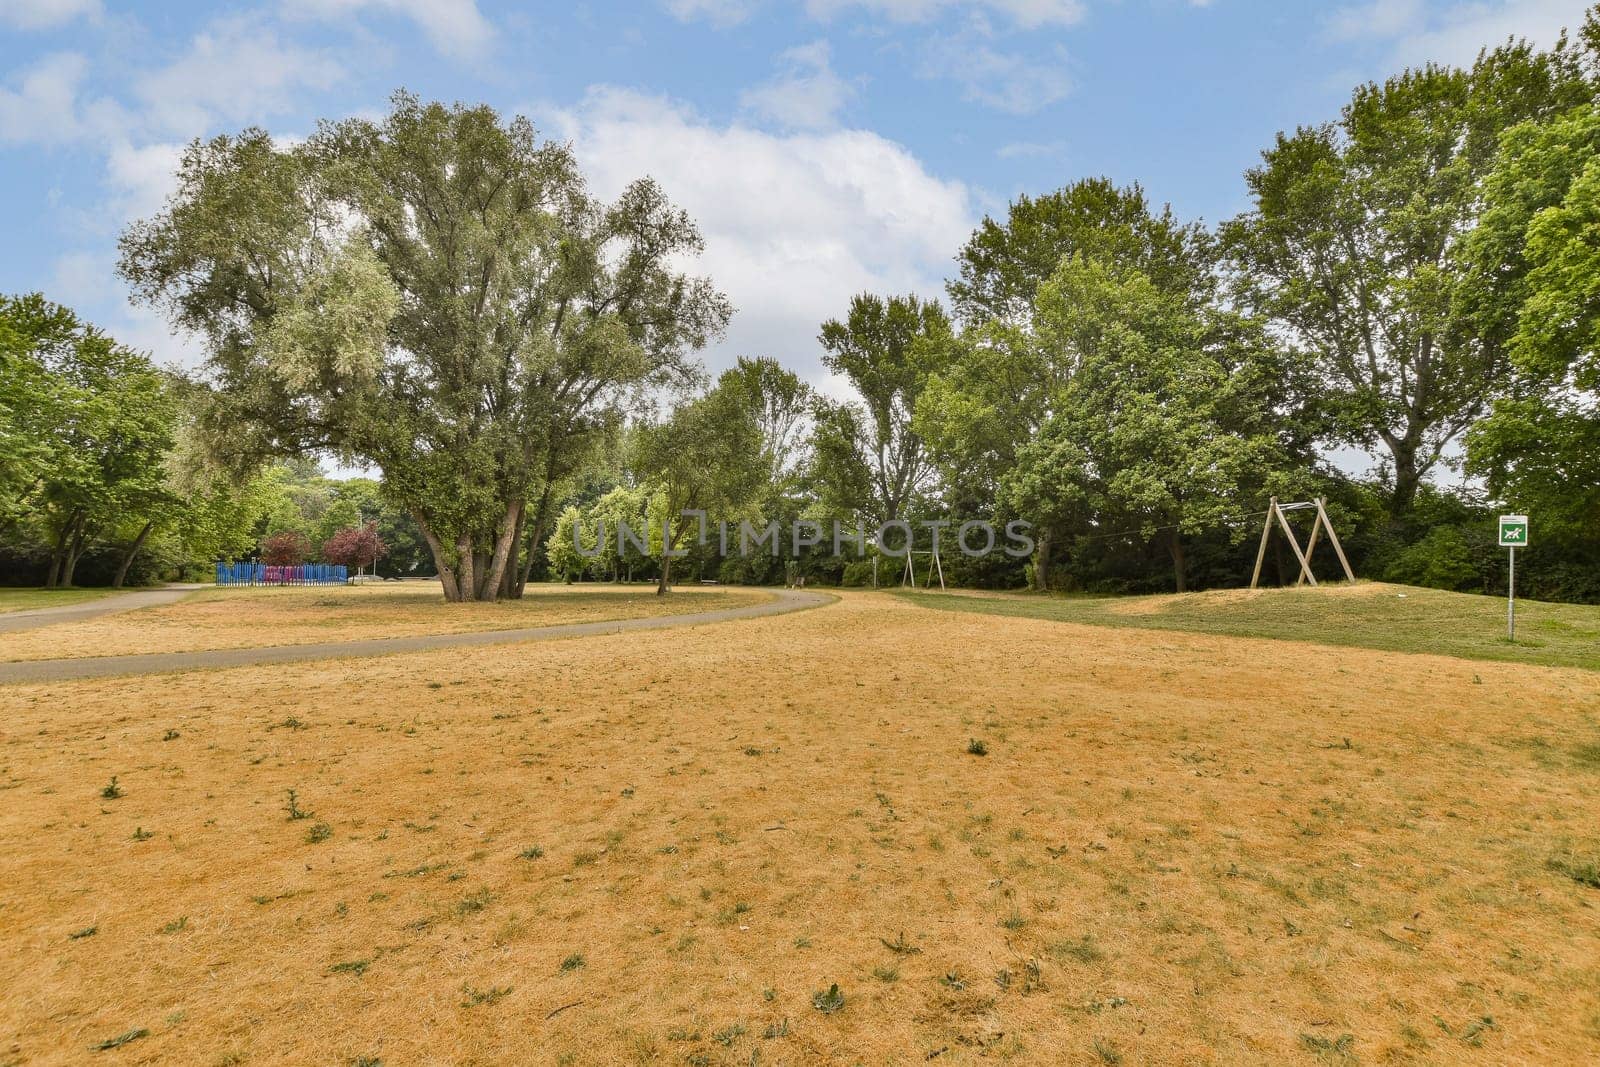 a grassy field with trees and a blue sky in the background on a sunny day at an outdoor play area